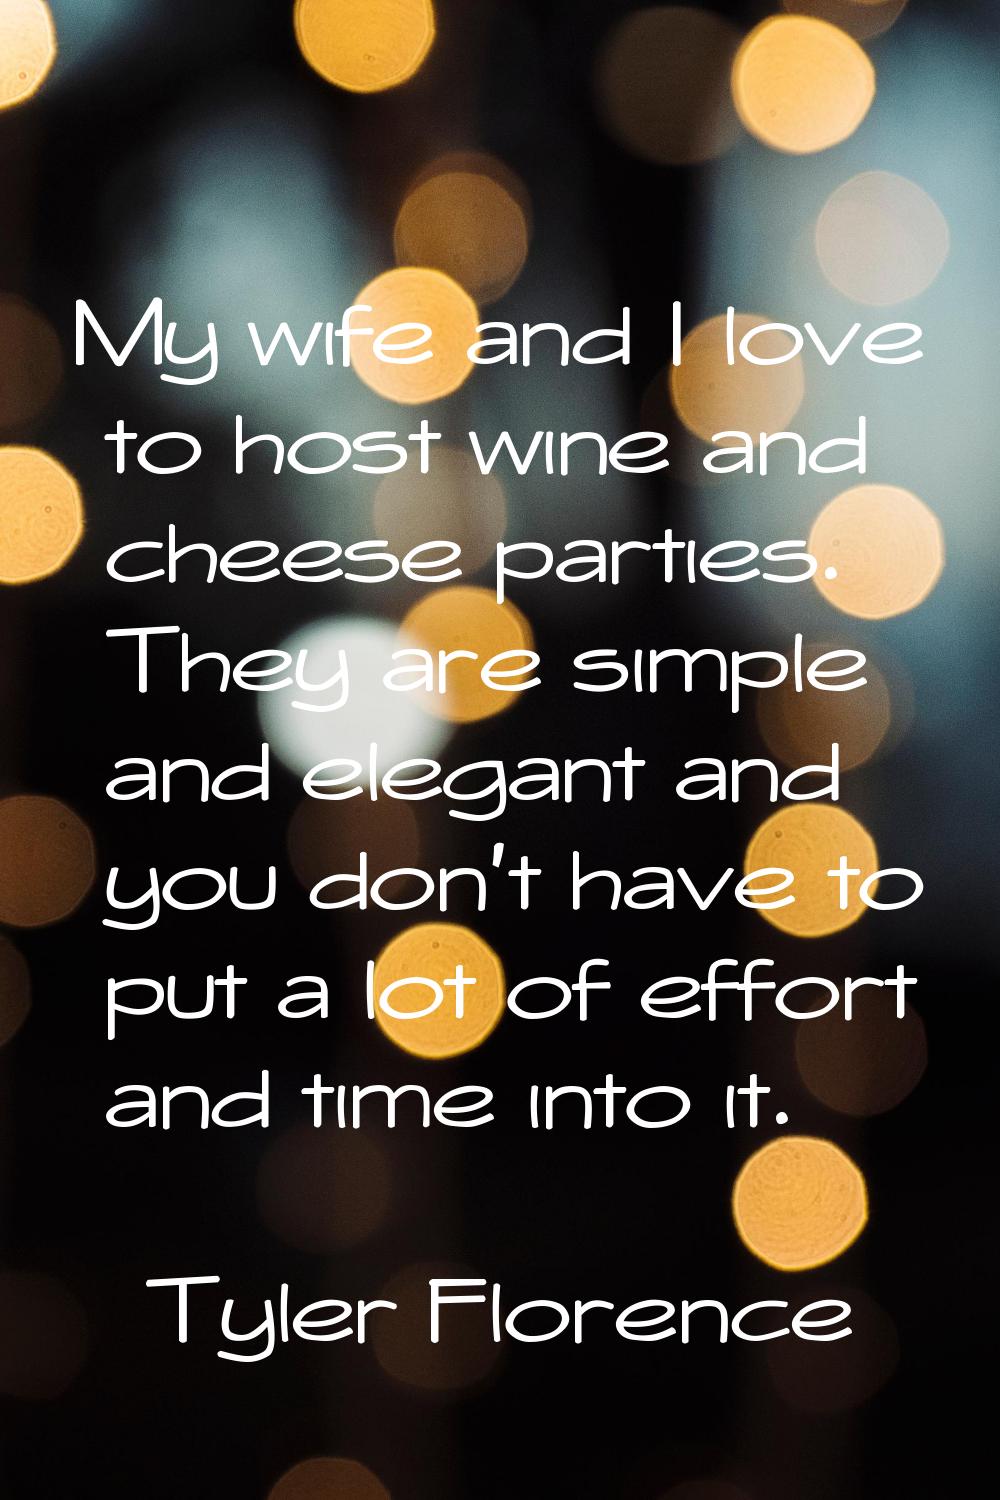 My wife and I love to host wine and cheese parties. They are simple and elegant and you don't have 